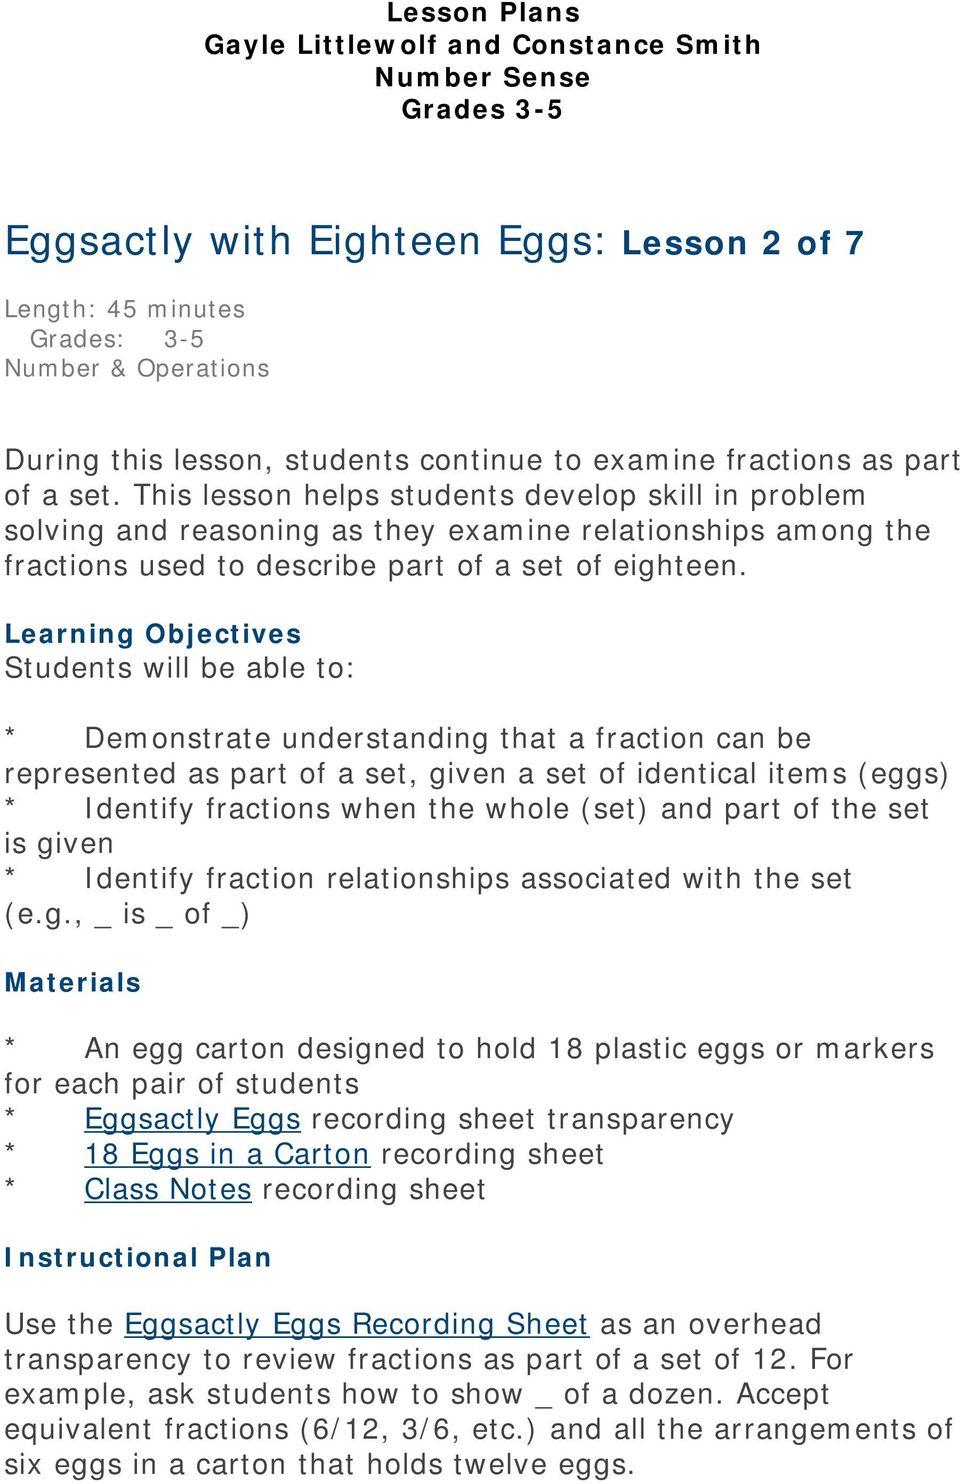 Learning Objectives Students will be able to: * Demonstrate understanding that a fraction can be represented as part of a set, given a set of identical items (eggs) * Identify fractions when the